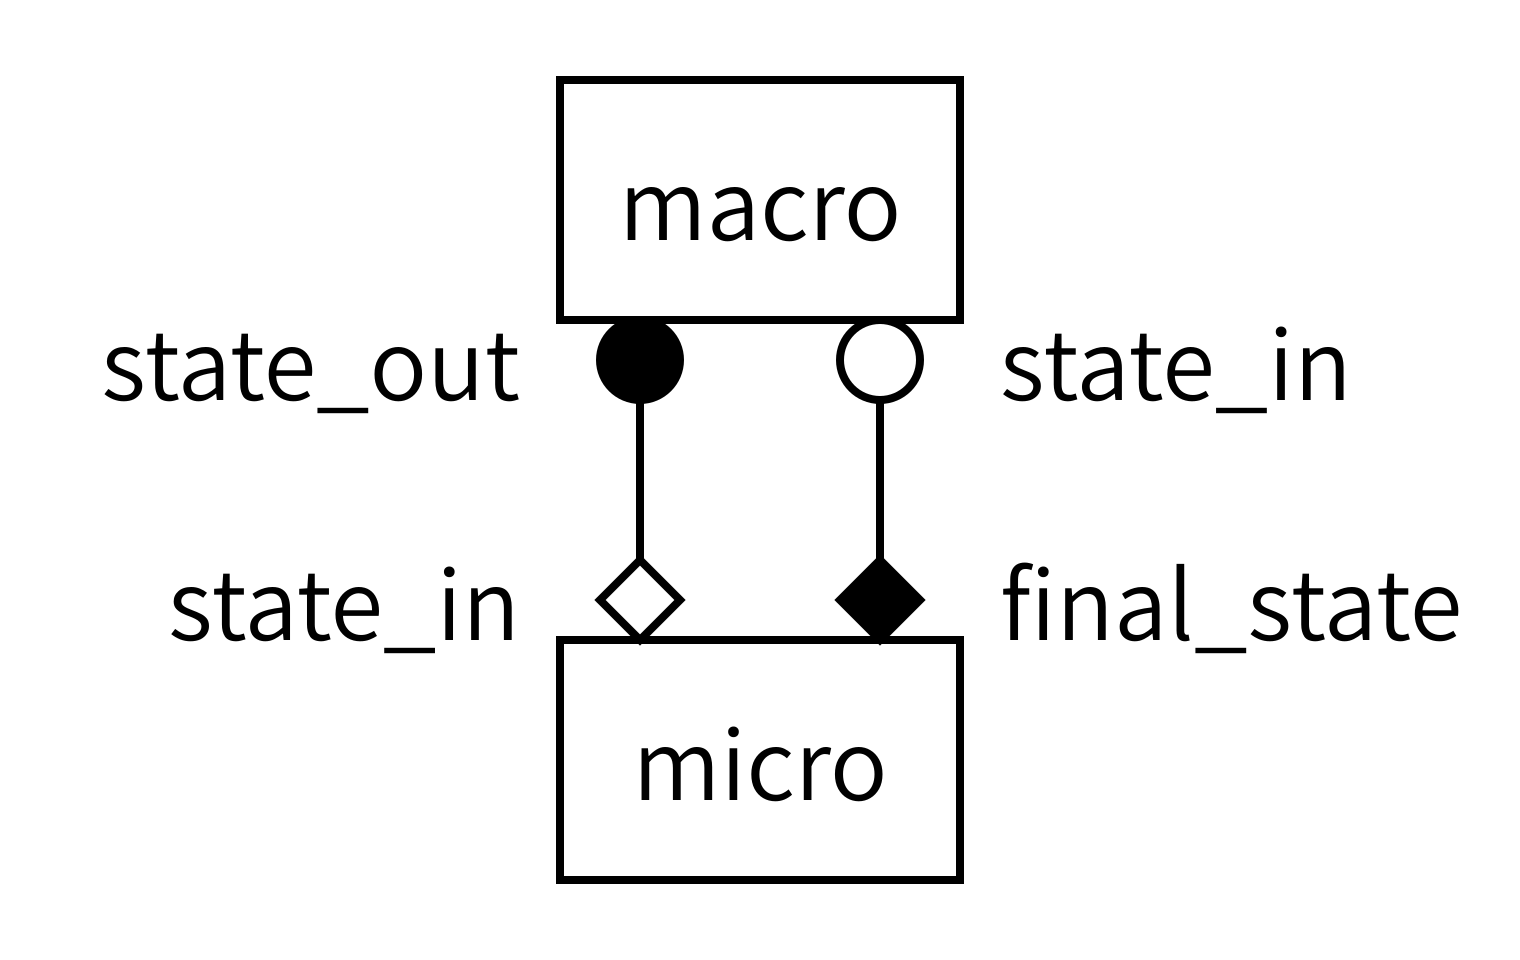 gMMSL diagram for the reaction-diffusion model. Two boxes labeled macro and micro represent the two submodels. A line connects a filled circle labeled state_out on macro to an open diamond labeled state_in on micro. A second line connects a filled diamond labeled final_state on micro to an open circle labeled state_in on macro.